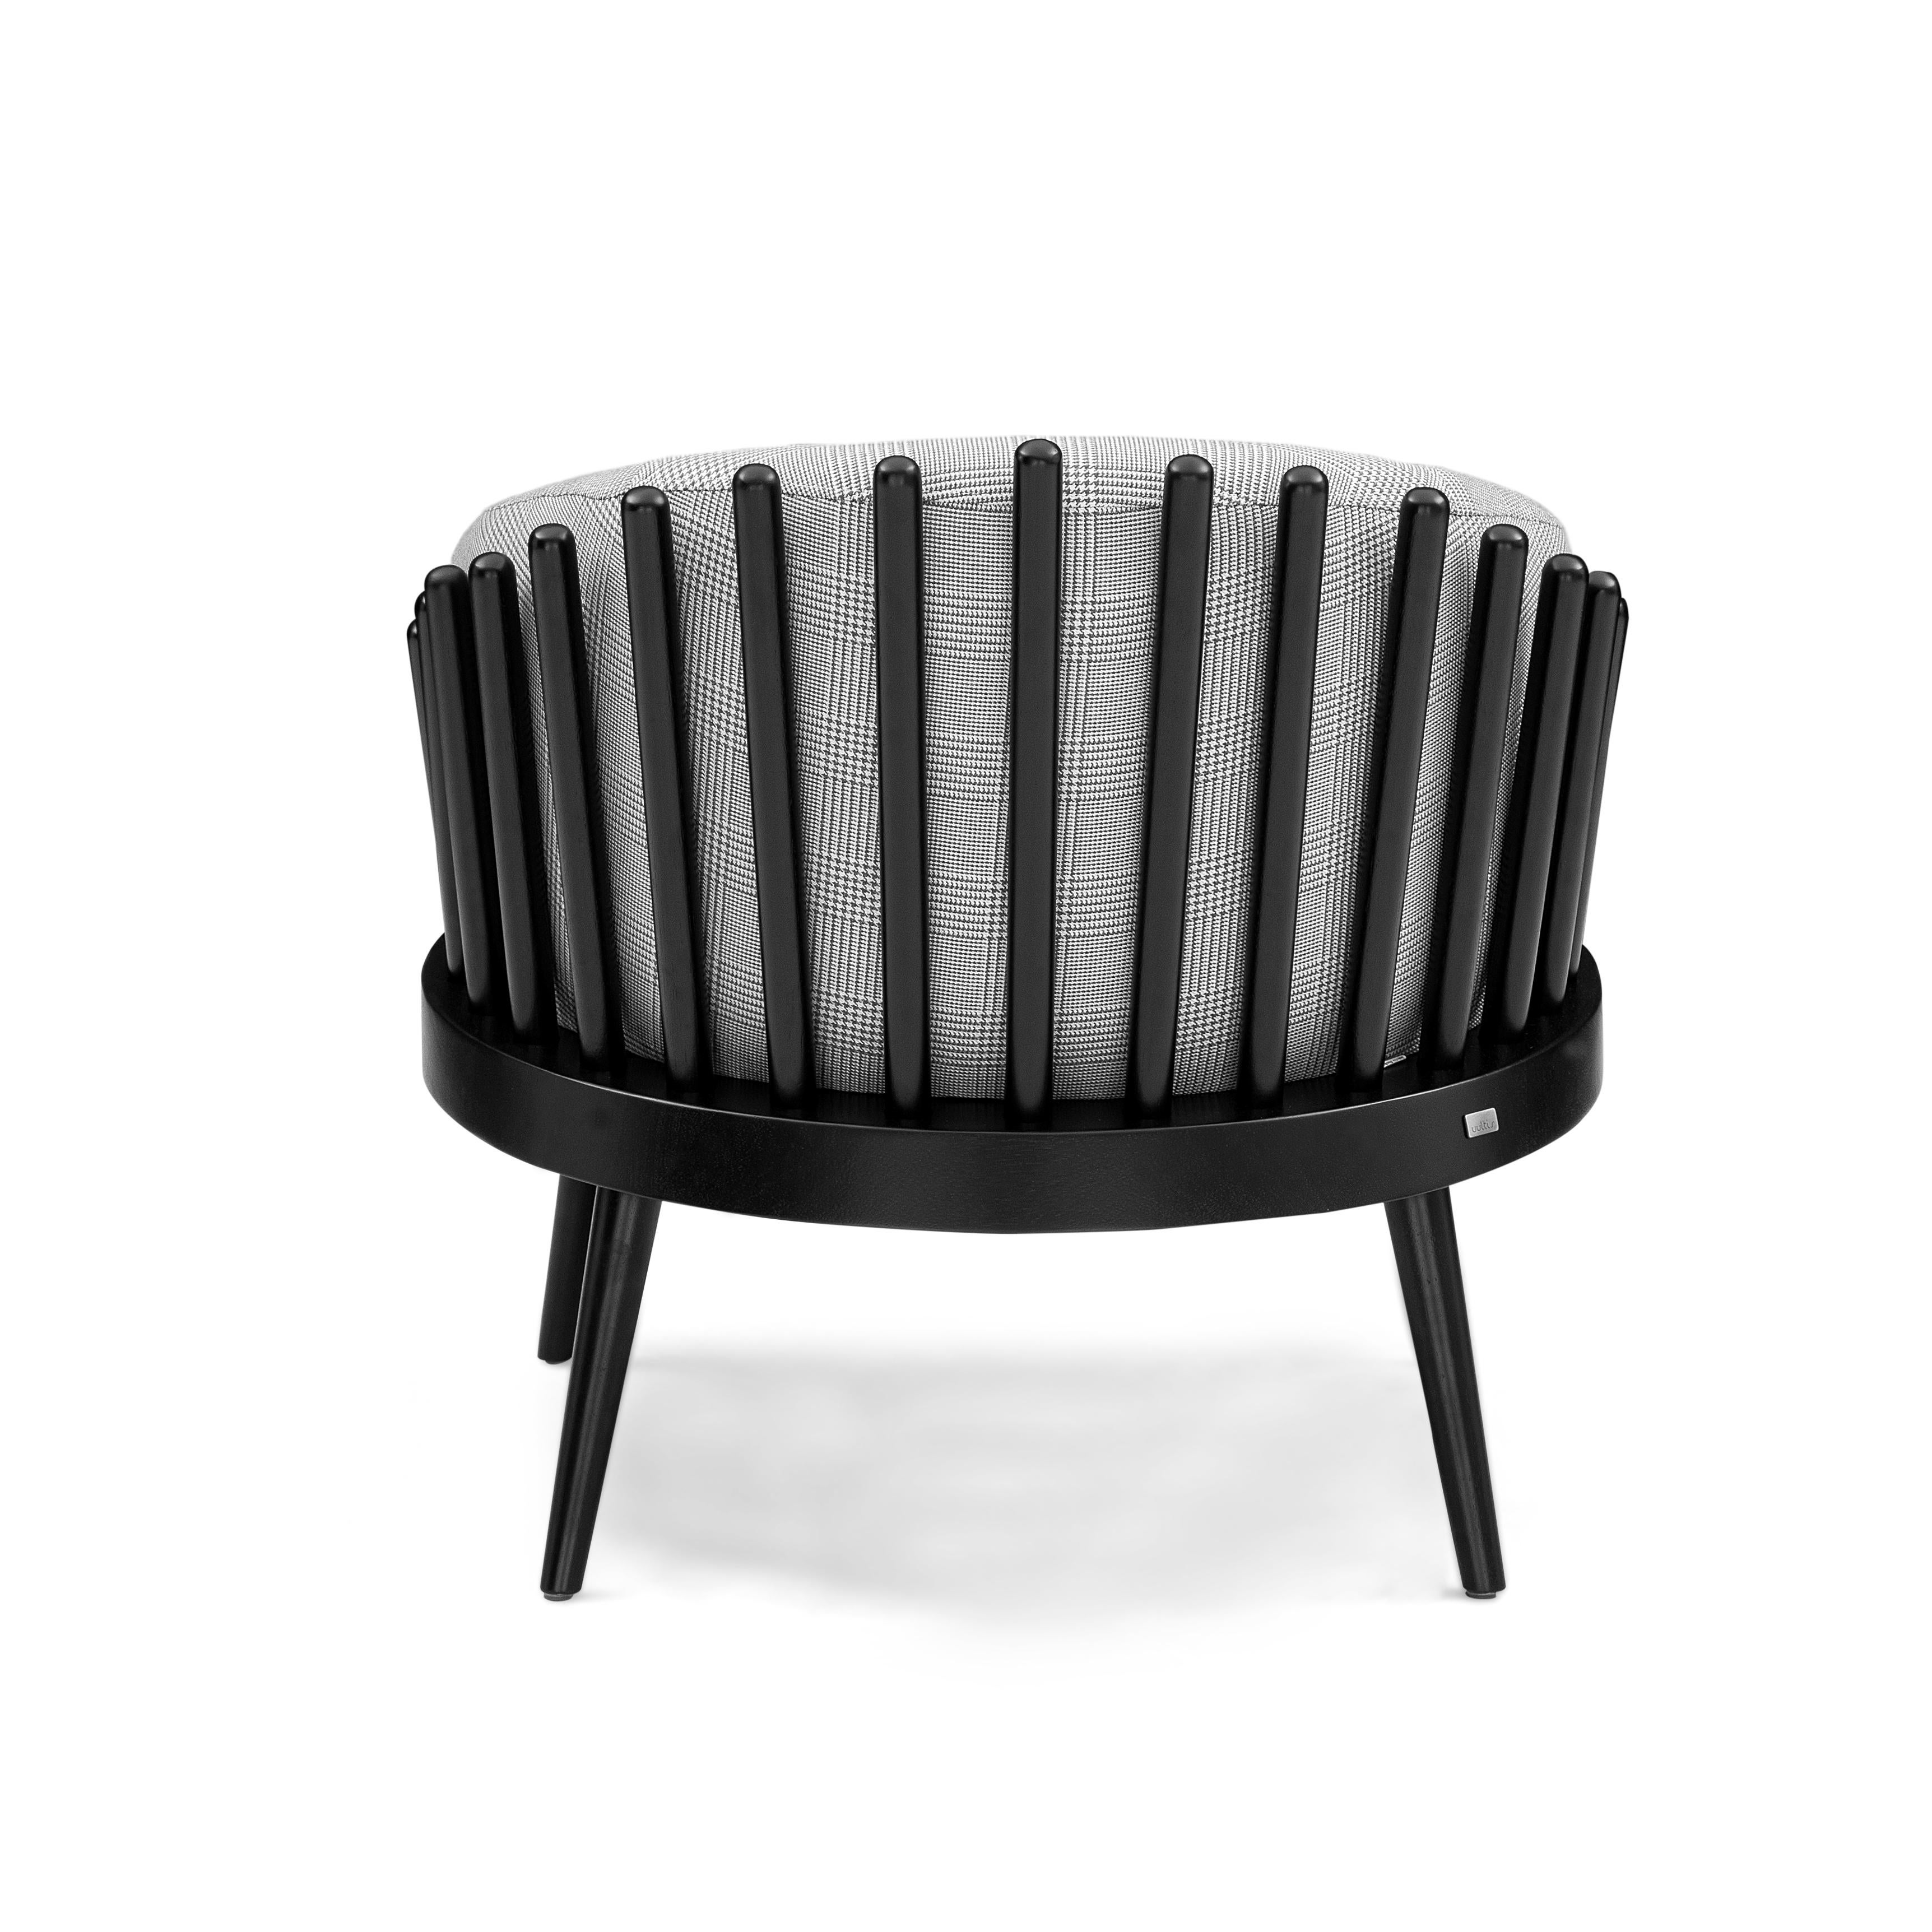 Brazilian Fane Upholstered Armchair in Black Wood Finish and Plaid Fabric For Sale